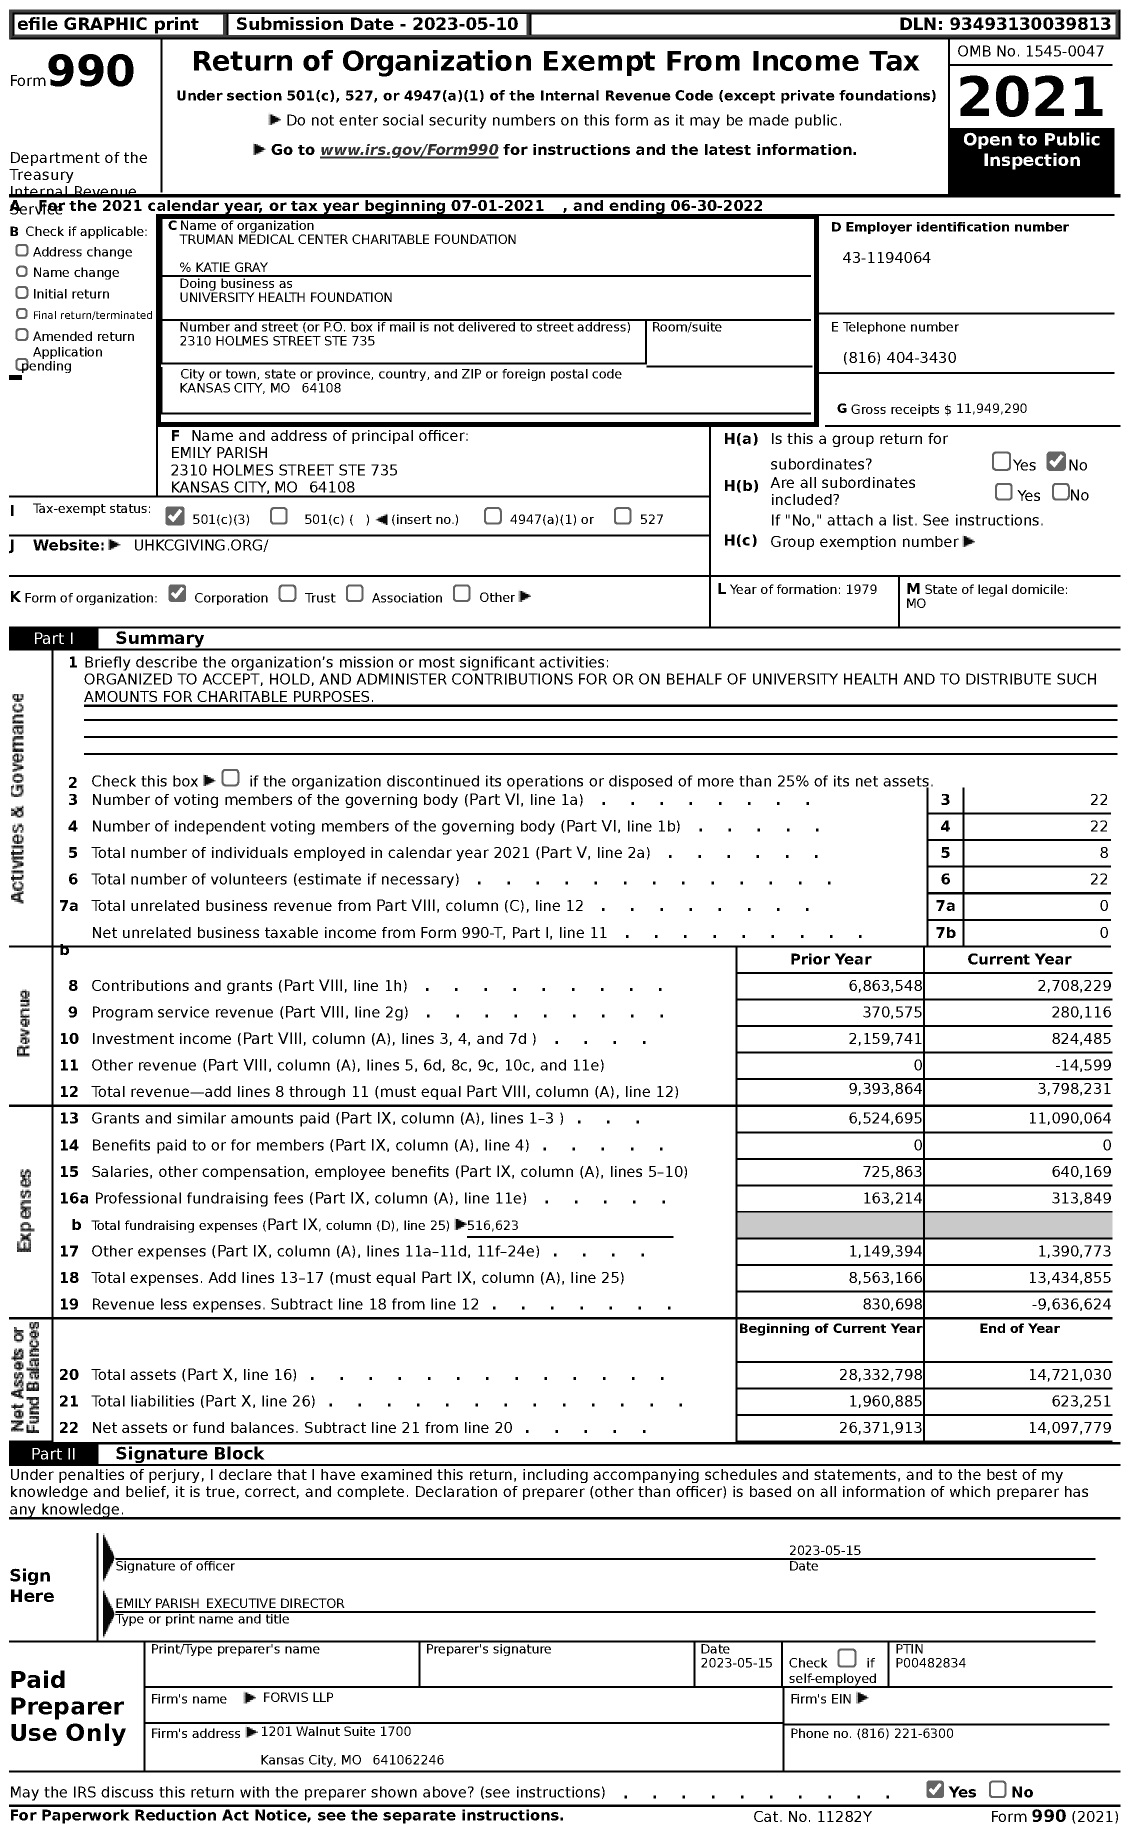 Image of first page of 2021 Form 990 for University Health Foundation / Truman Medical Center Charitable Foundation (TMC)